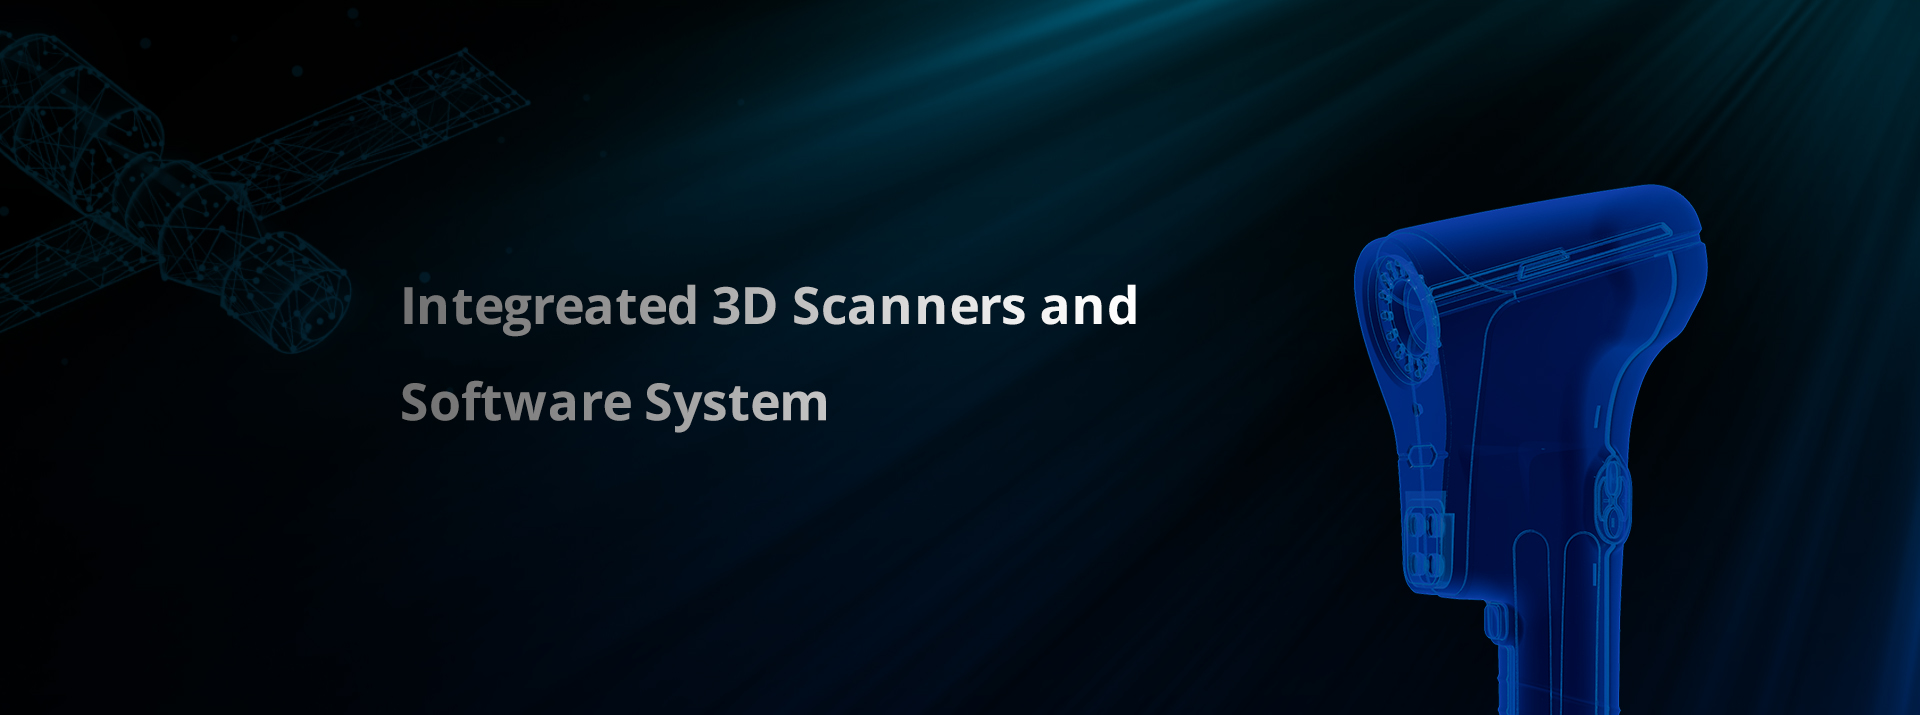 Scanners 3D